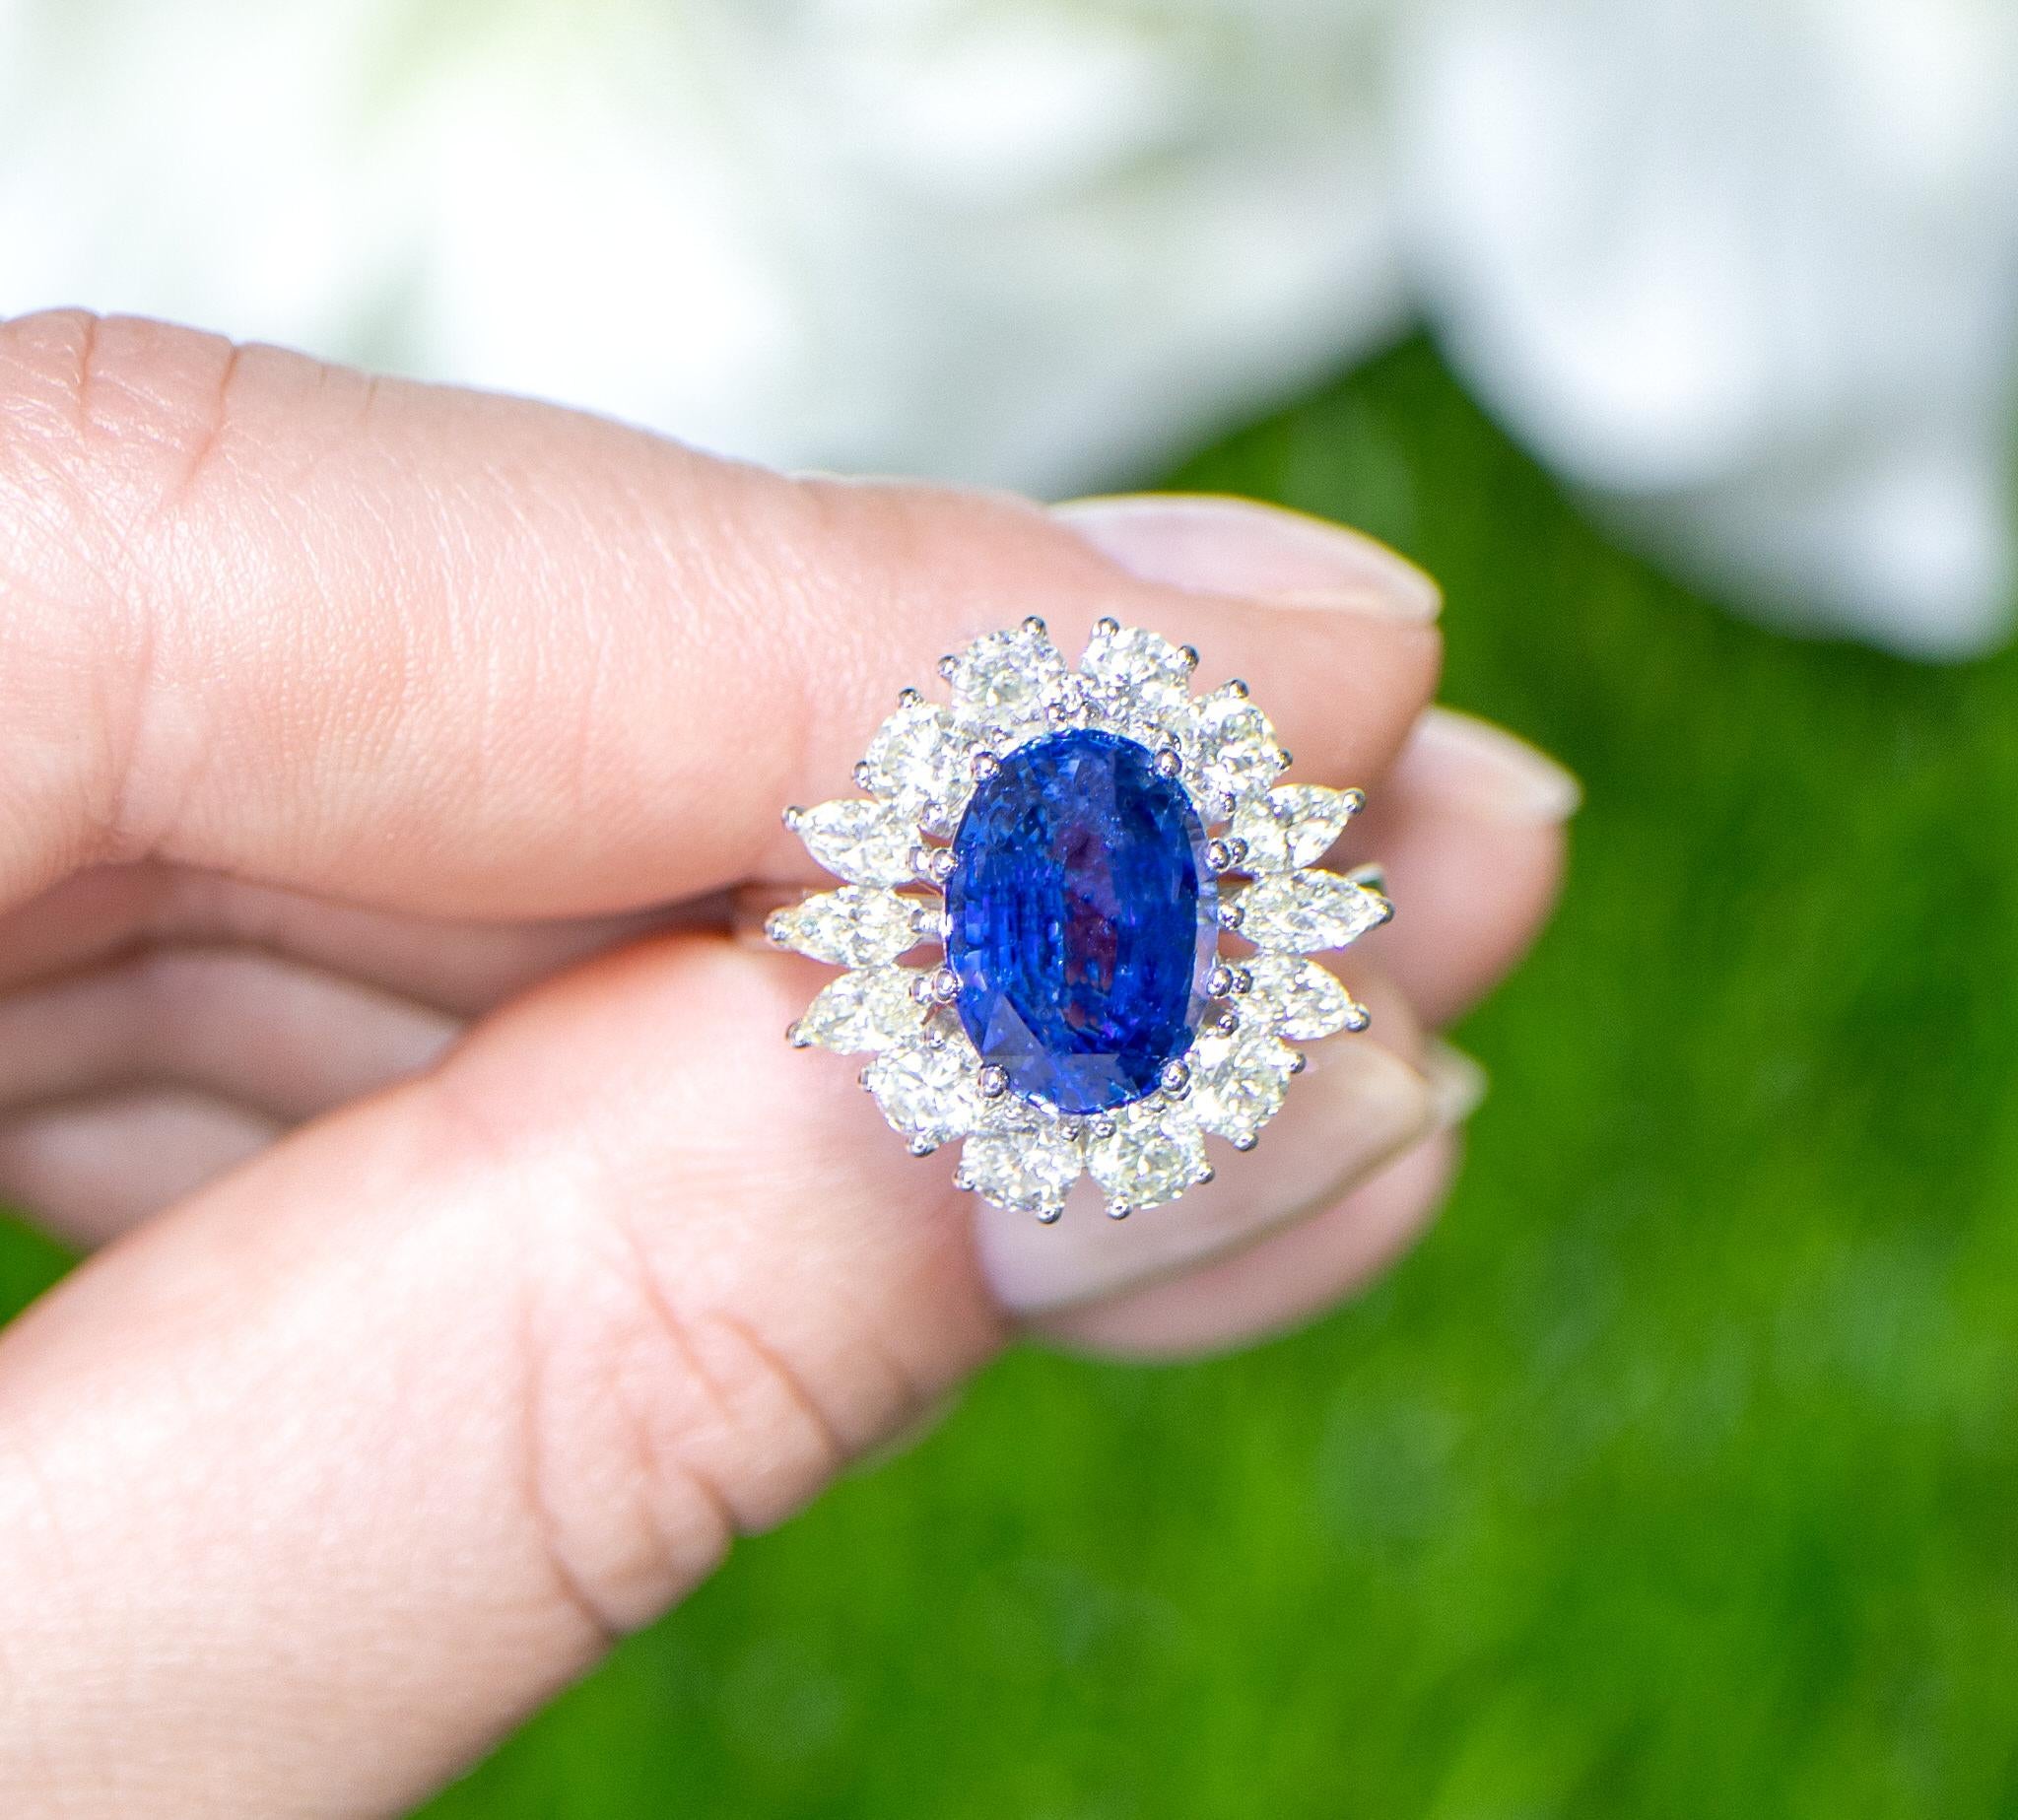 Blue Sapphire Ring Large Diamond Halo 6.26 Carats 18K Gold In Excellent Condition For Sale In Laguna Niguel, CA